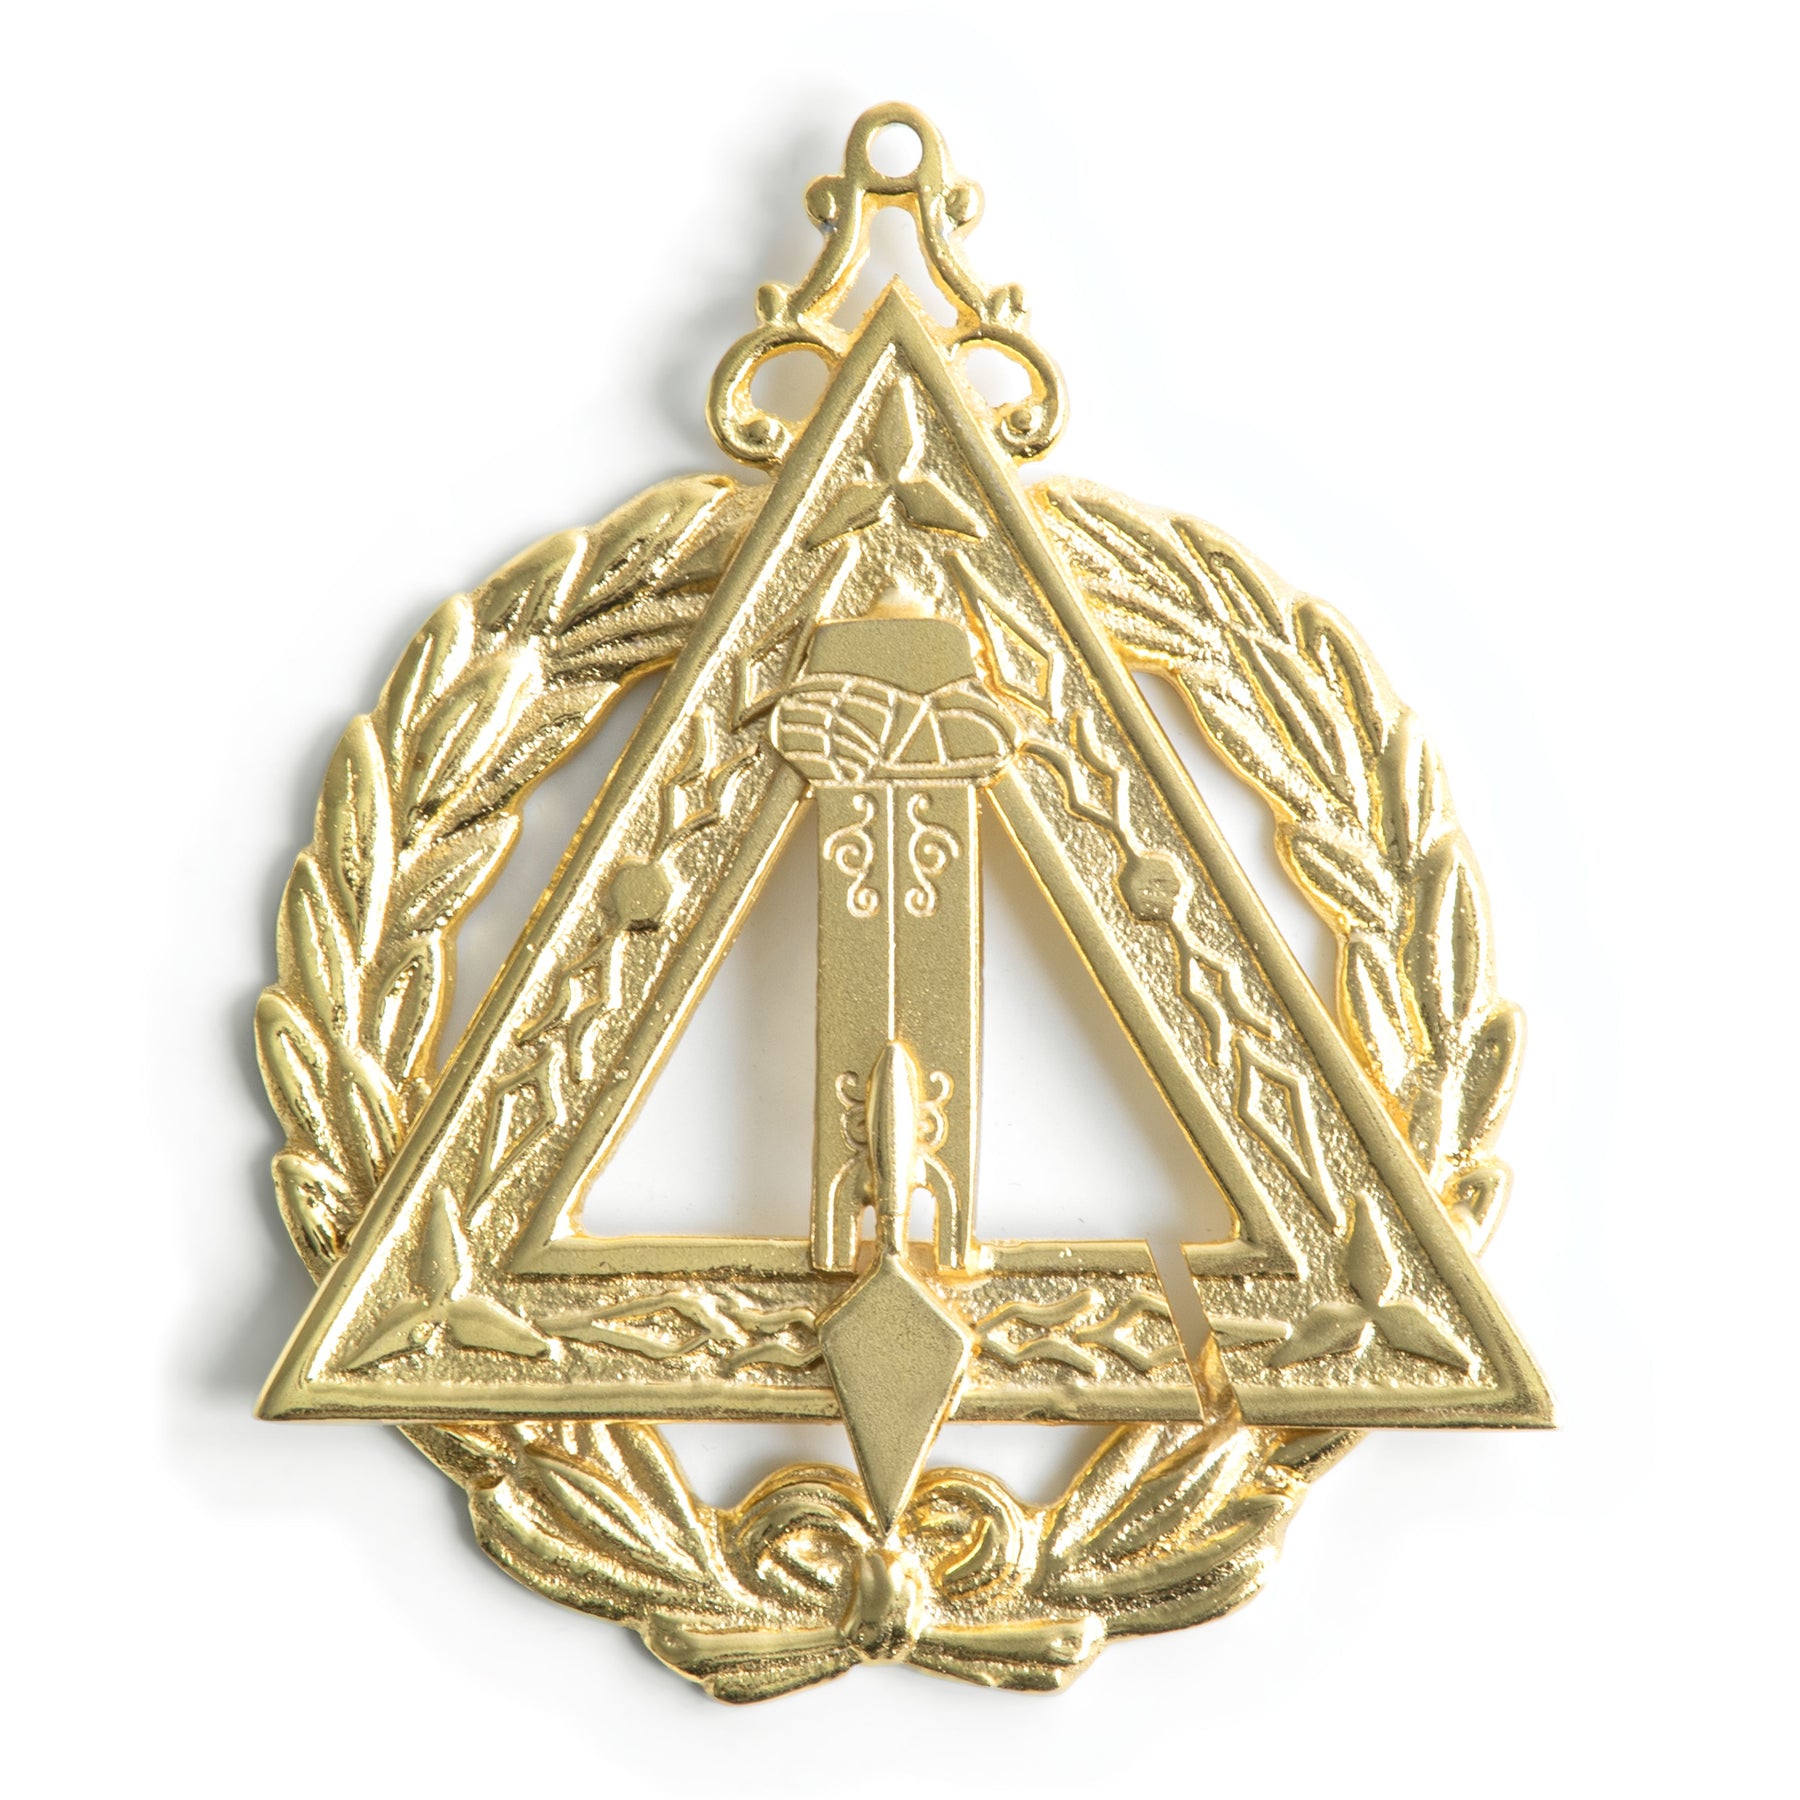 Grand Conductor Of Work Royal & Select Masters Officer Collar Jewel - Gold Plated - Bricks Masons